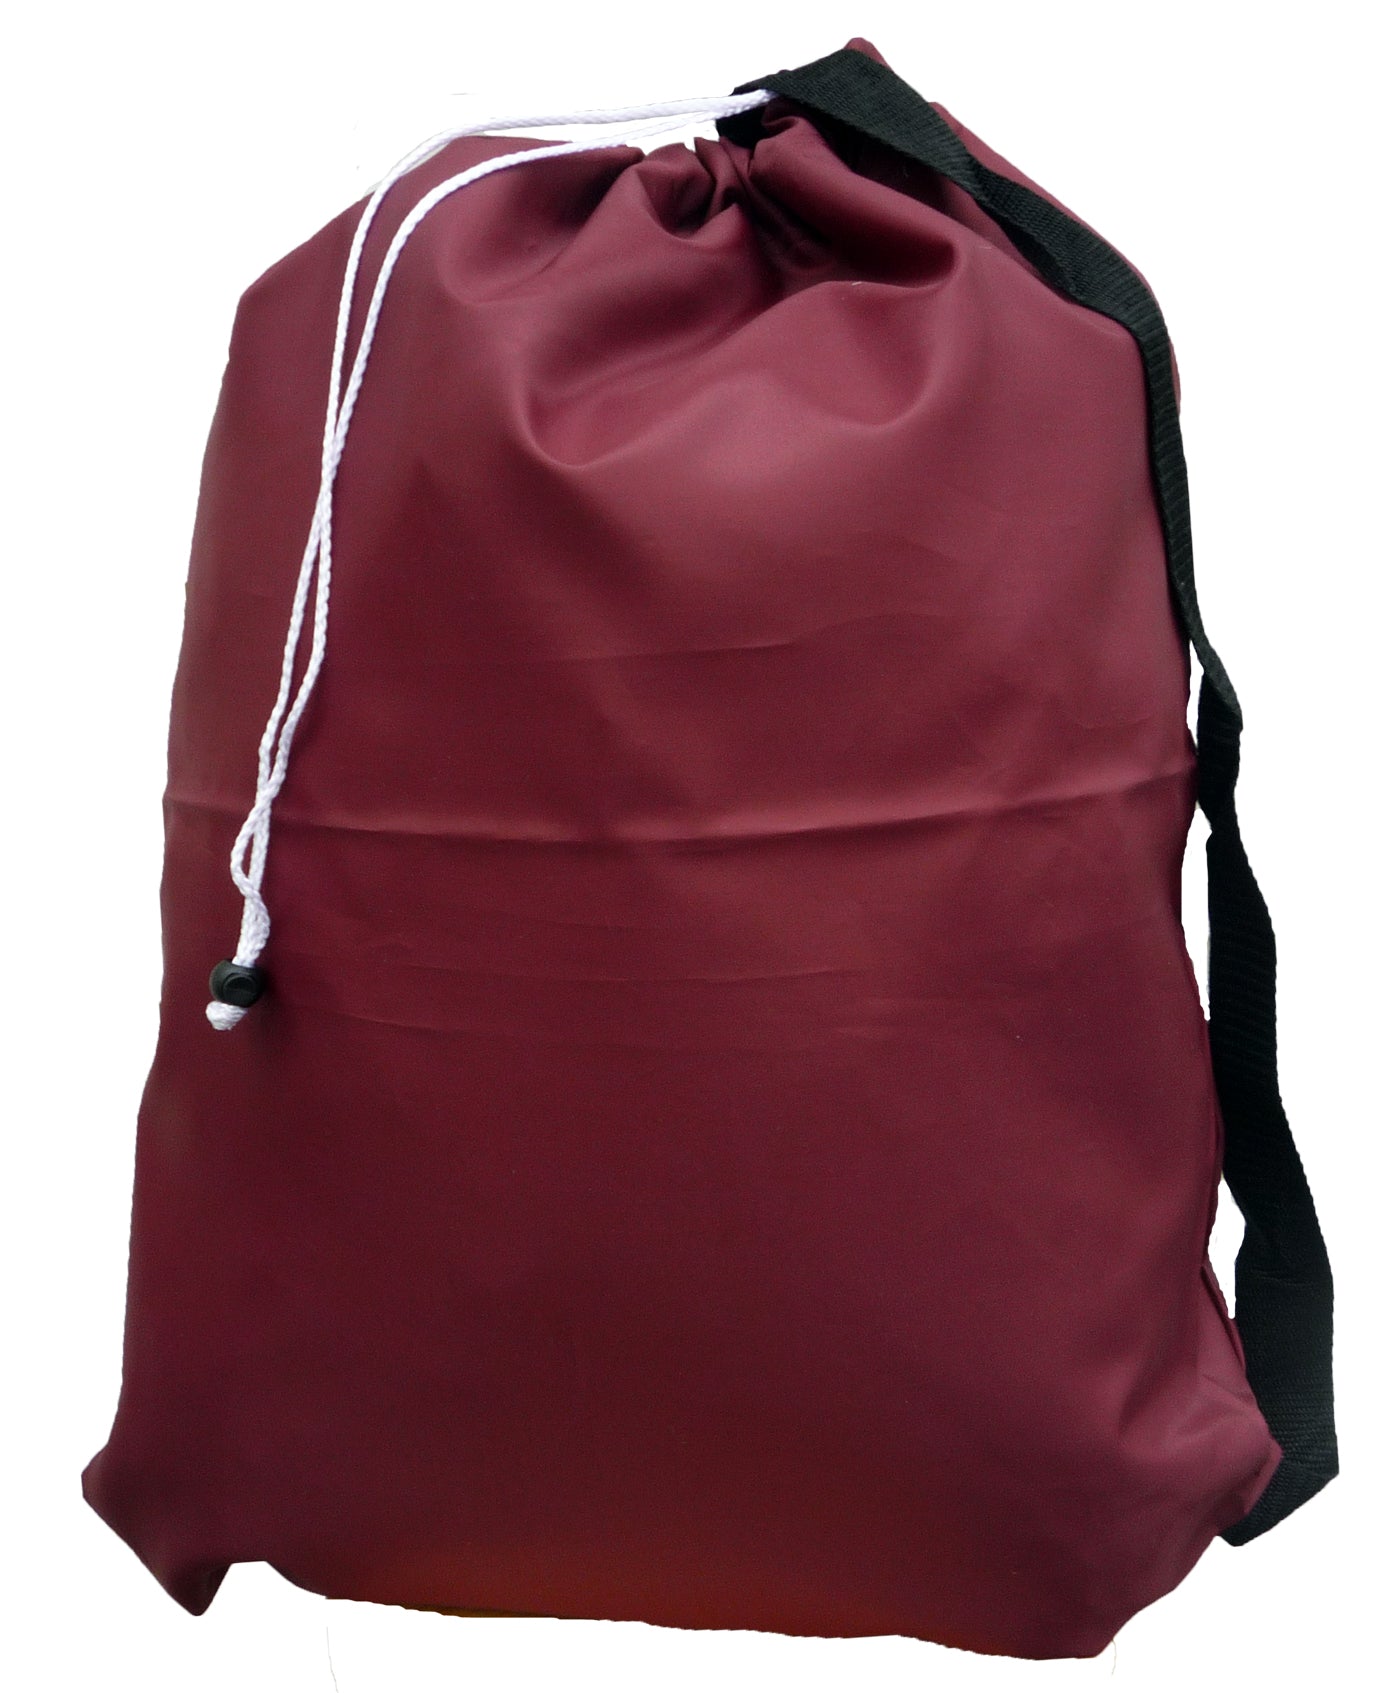 Small Laundry Bag with Strap, Burgundy